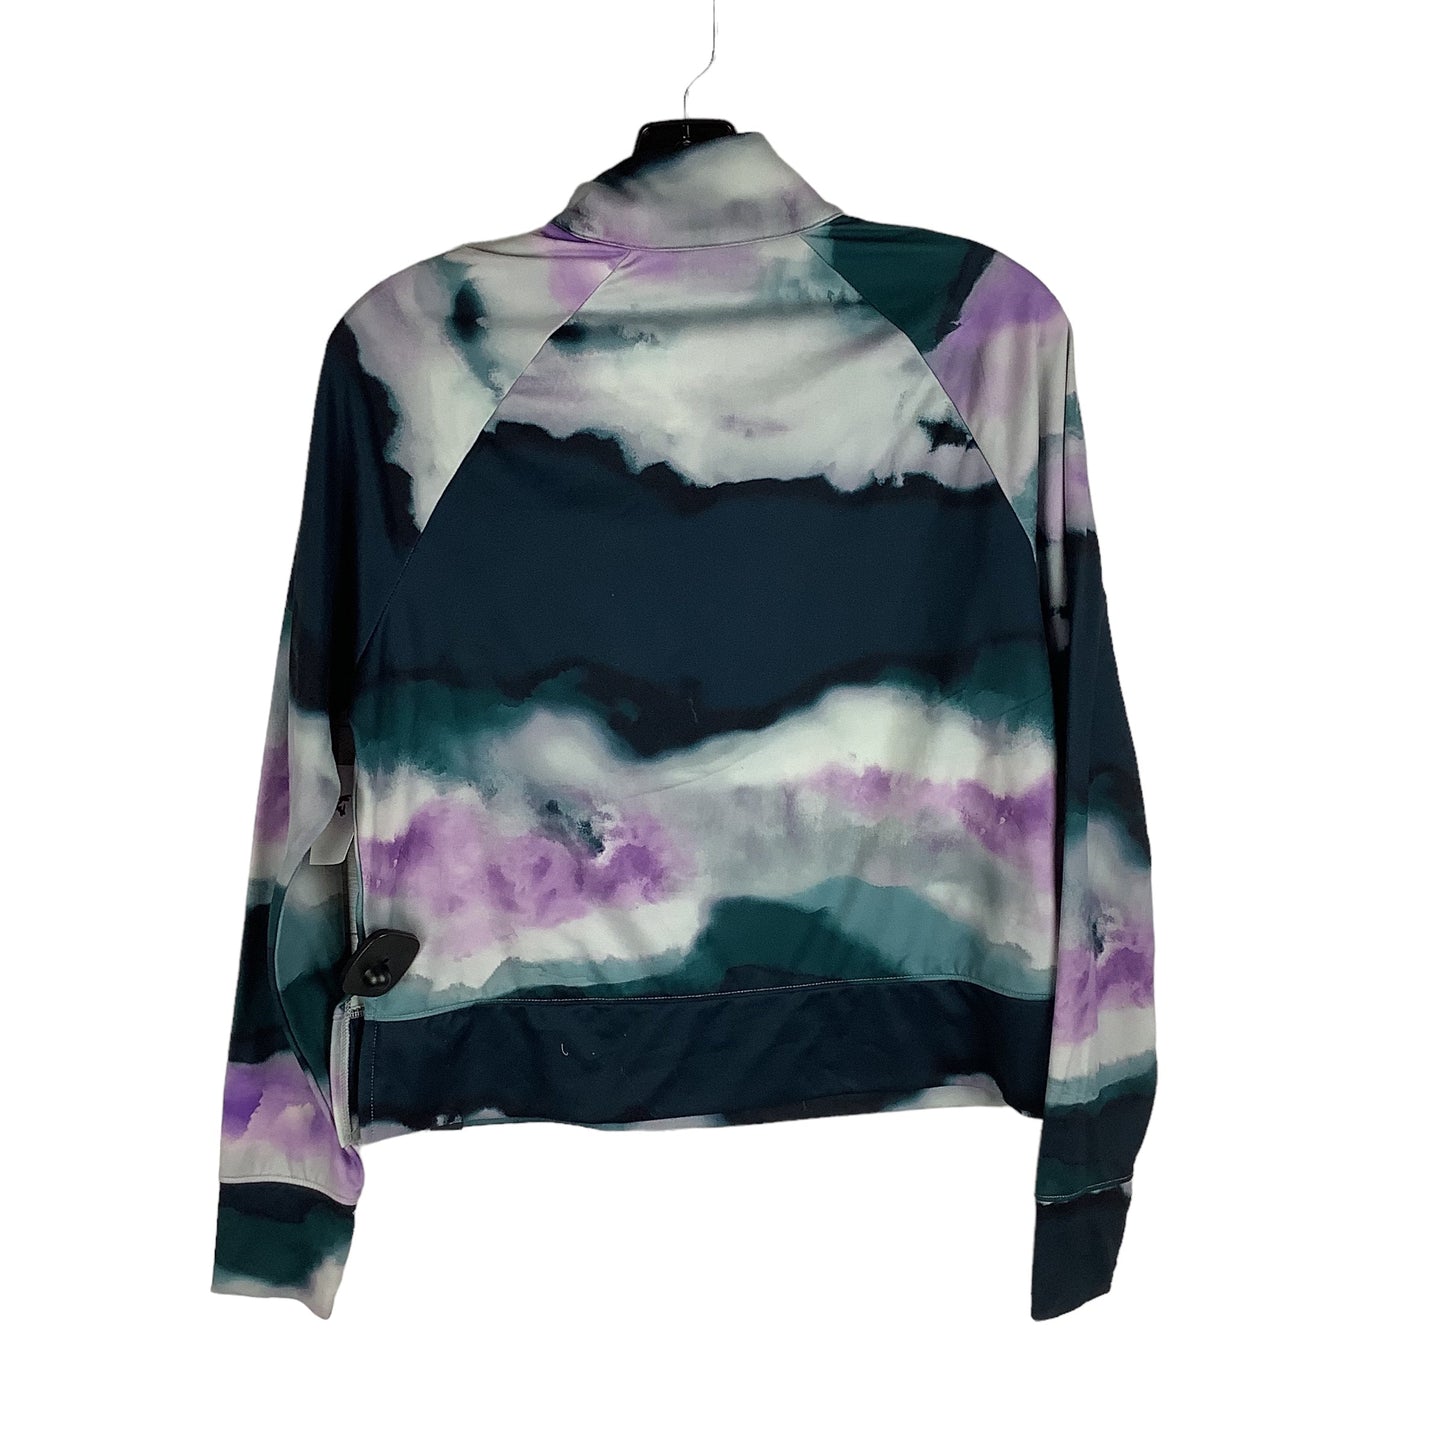 Tie Dye Print Athletic Top Long Sleeve Collar Clothes Mentor, Size S